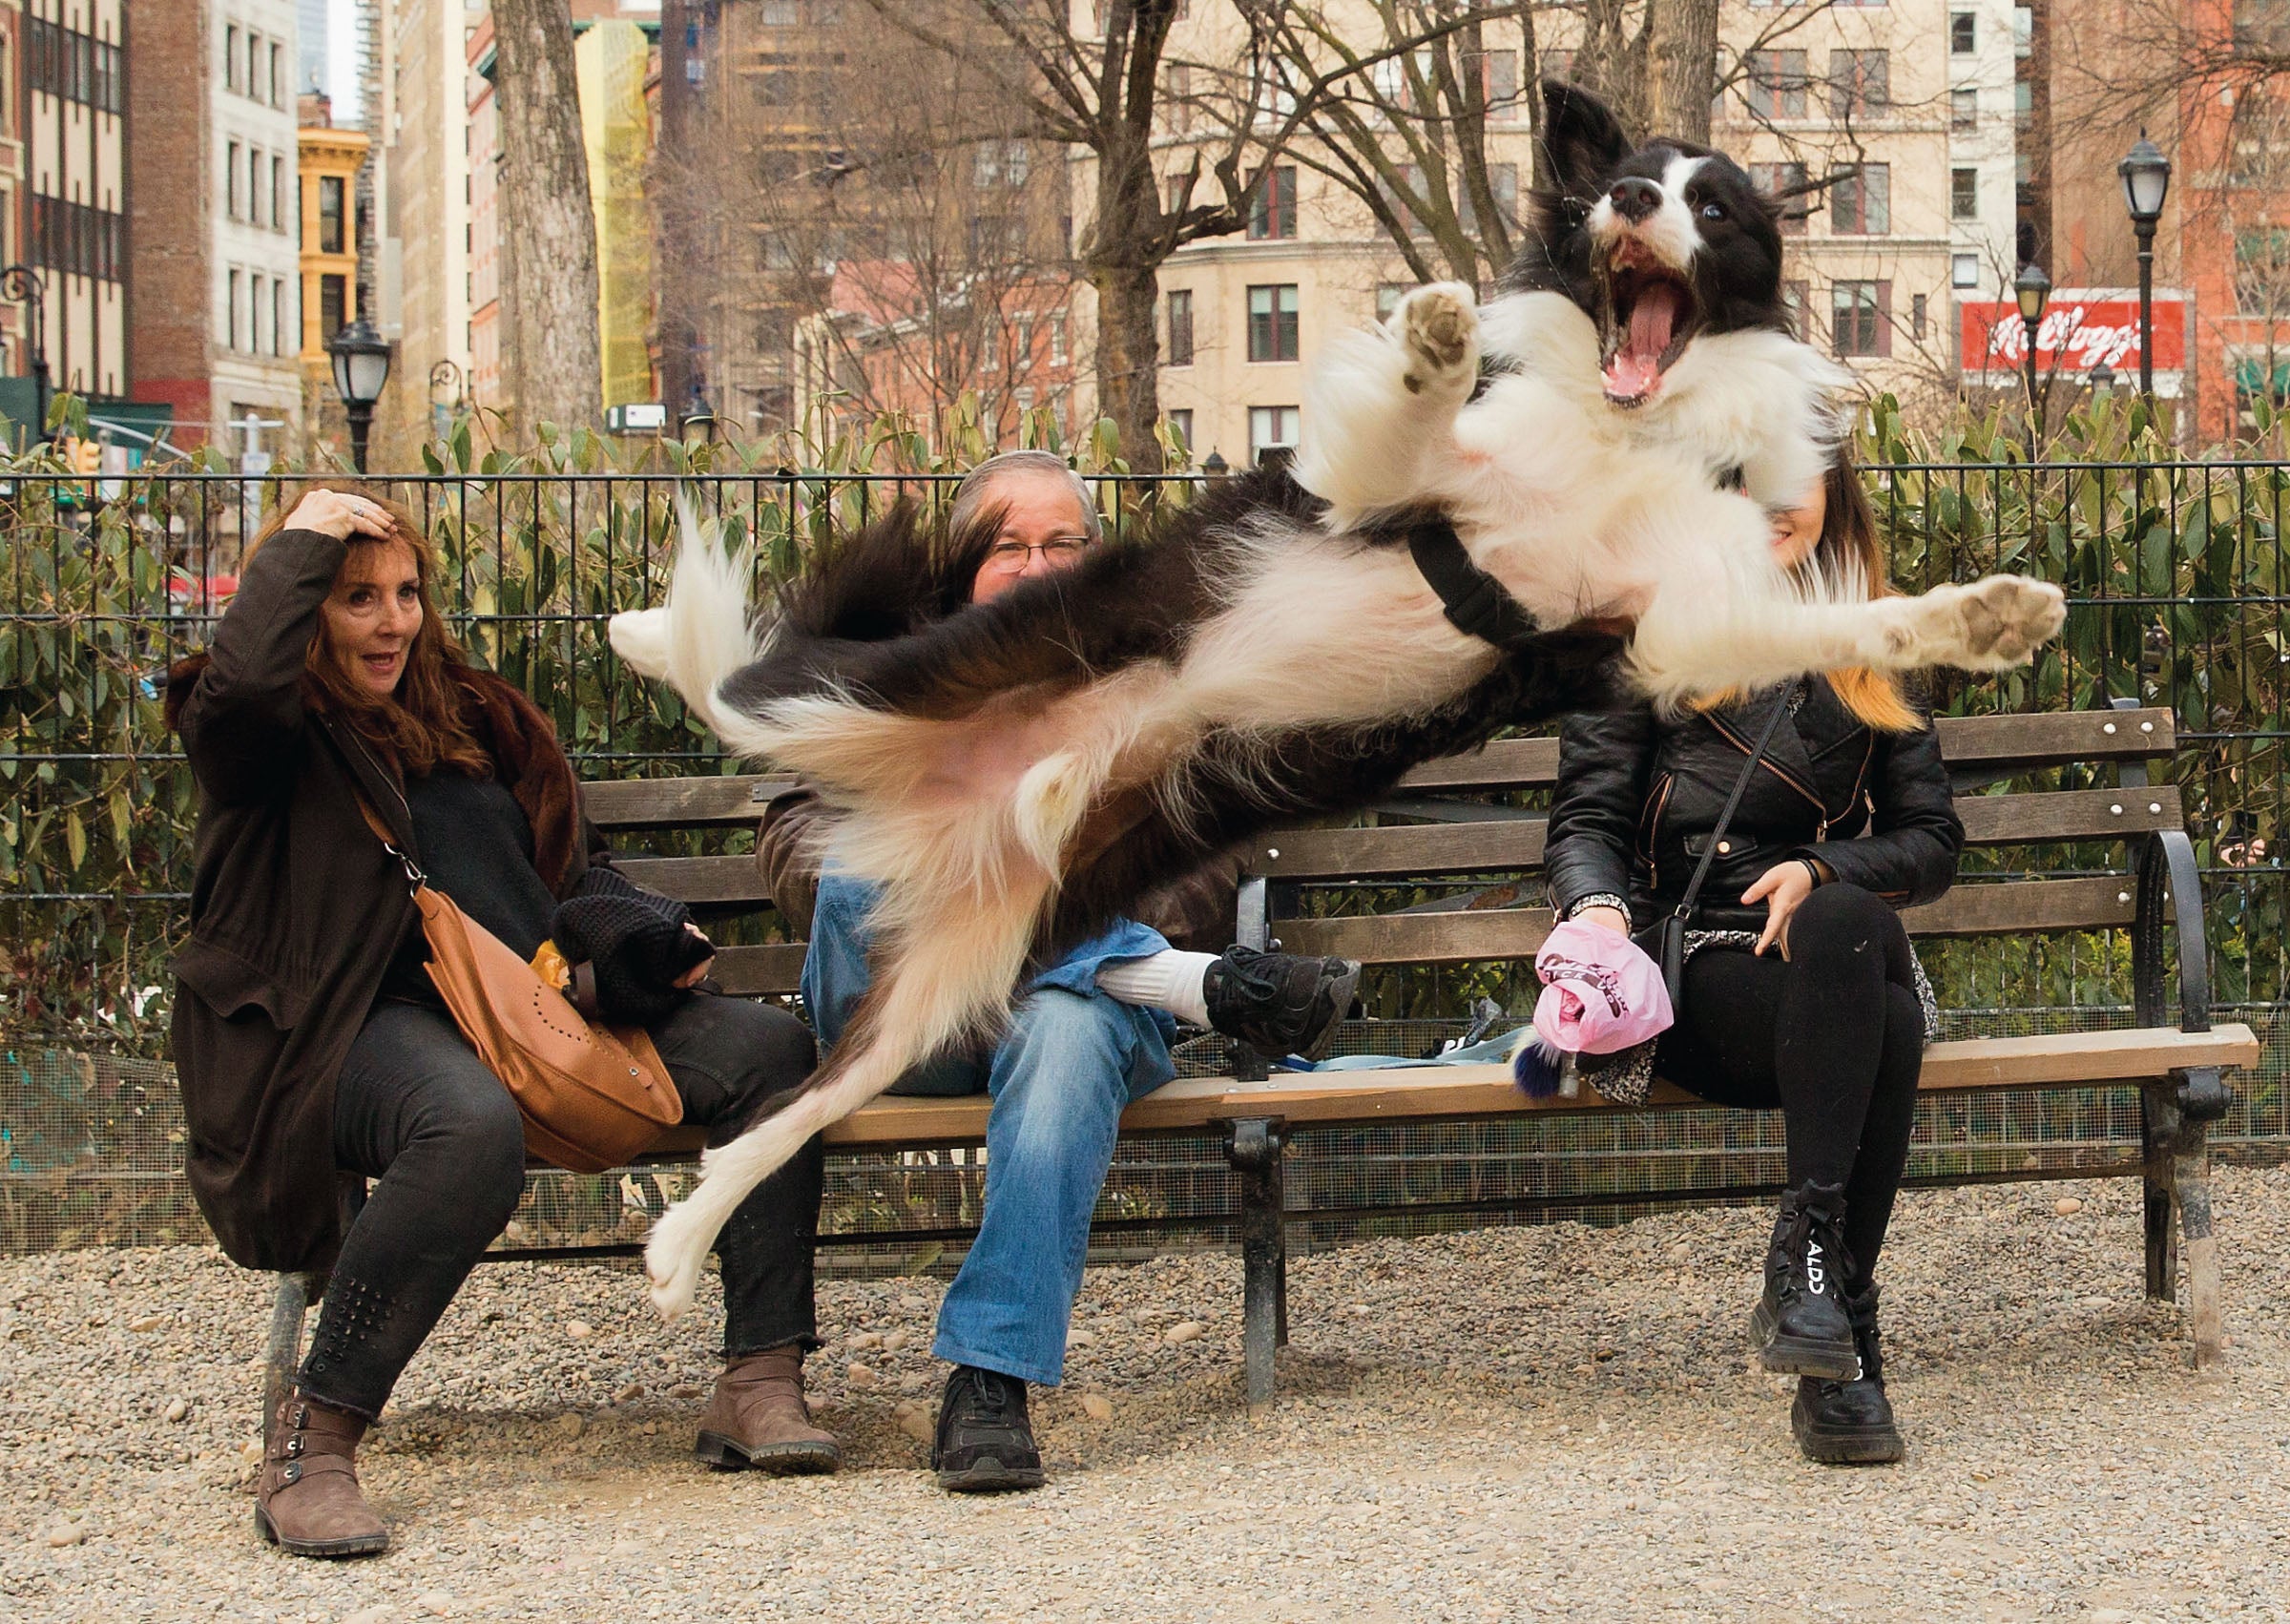 A dog leaps in front of people sitting on a bench in a park.